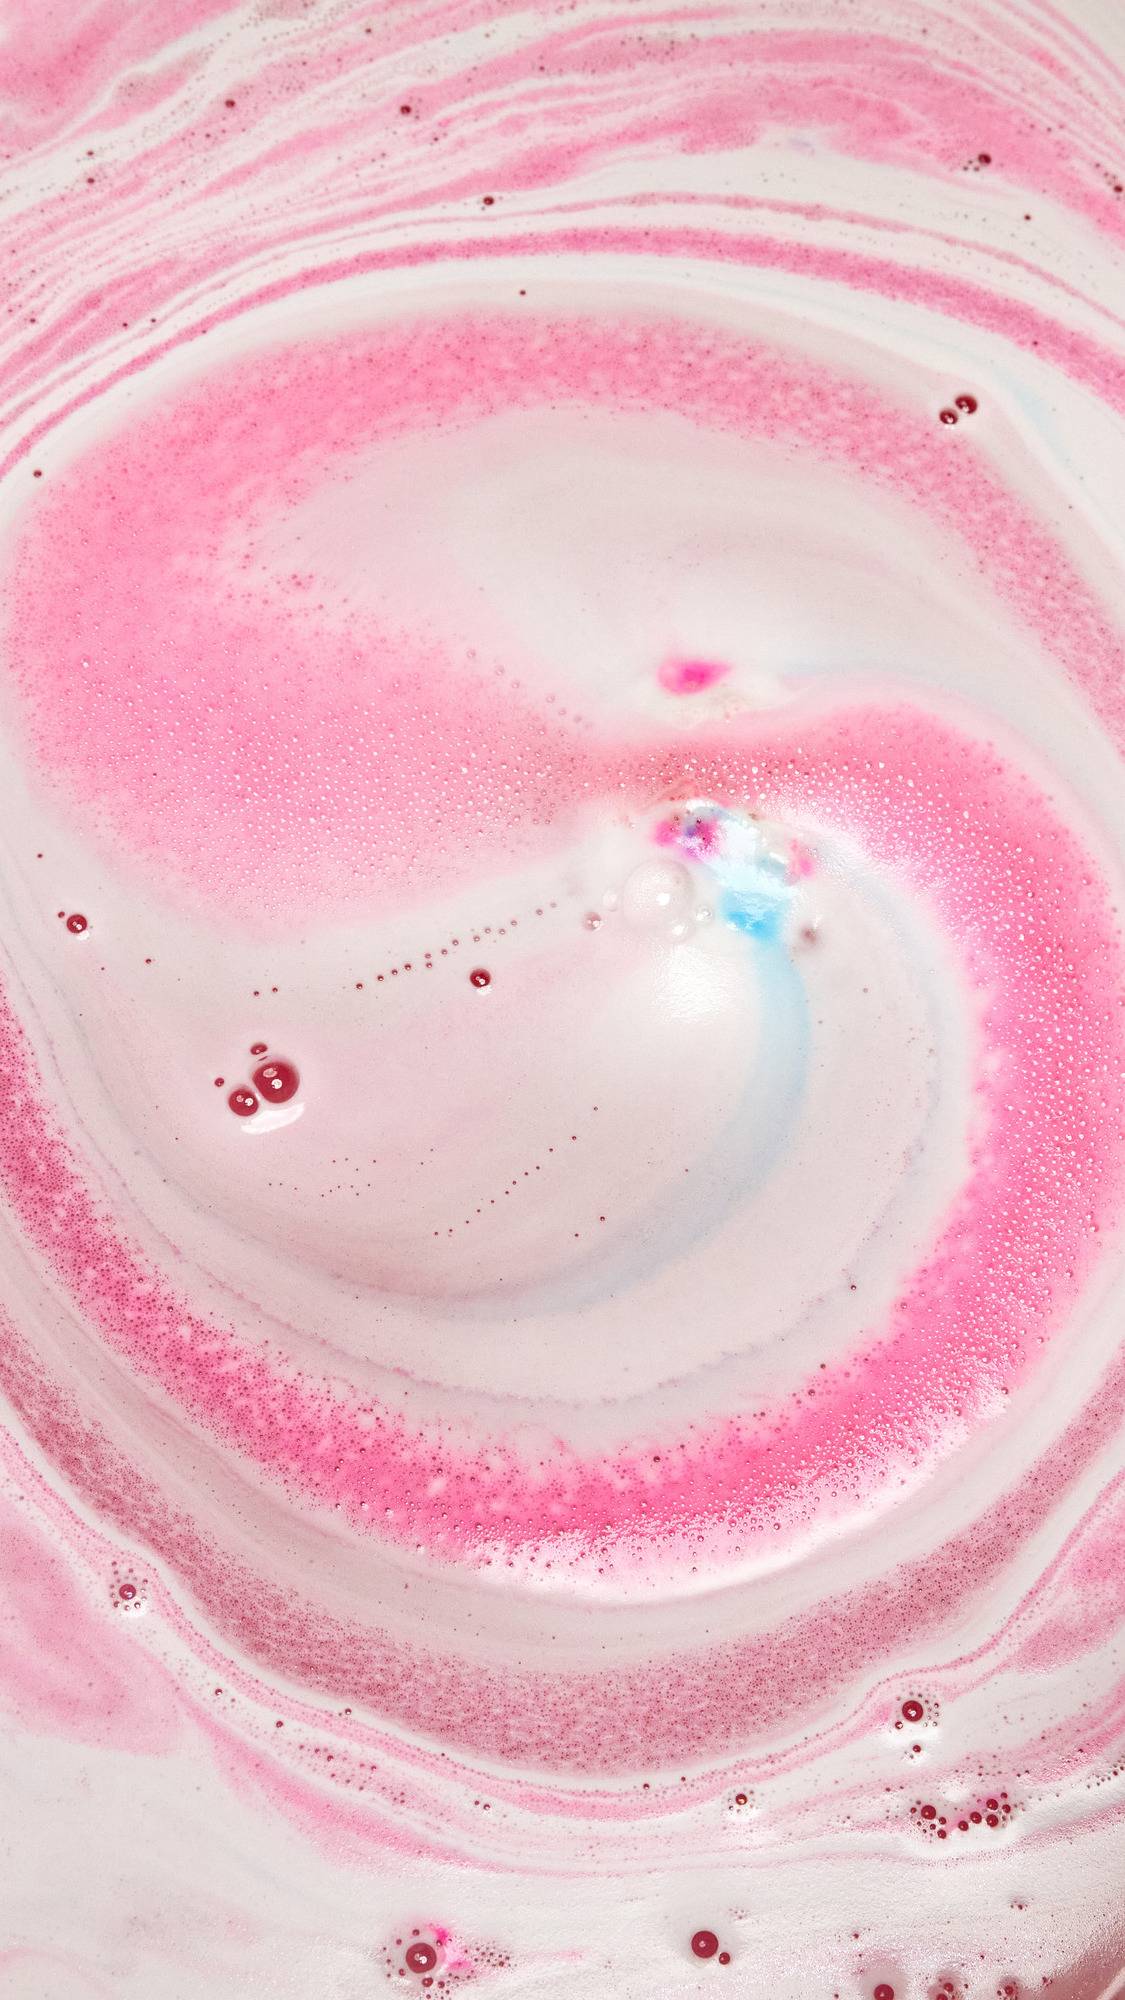 The American Cream bath bomb is slowly dissolving in the bath water giving off a pretty pink and white rippled foam across the surface with a small speck of blue in the centre.